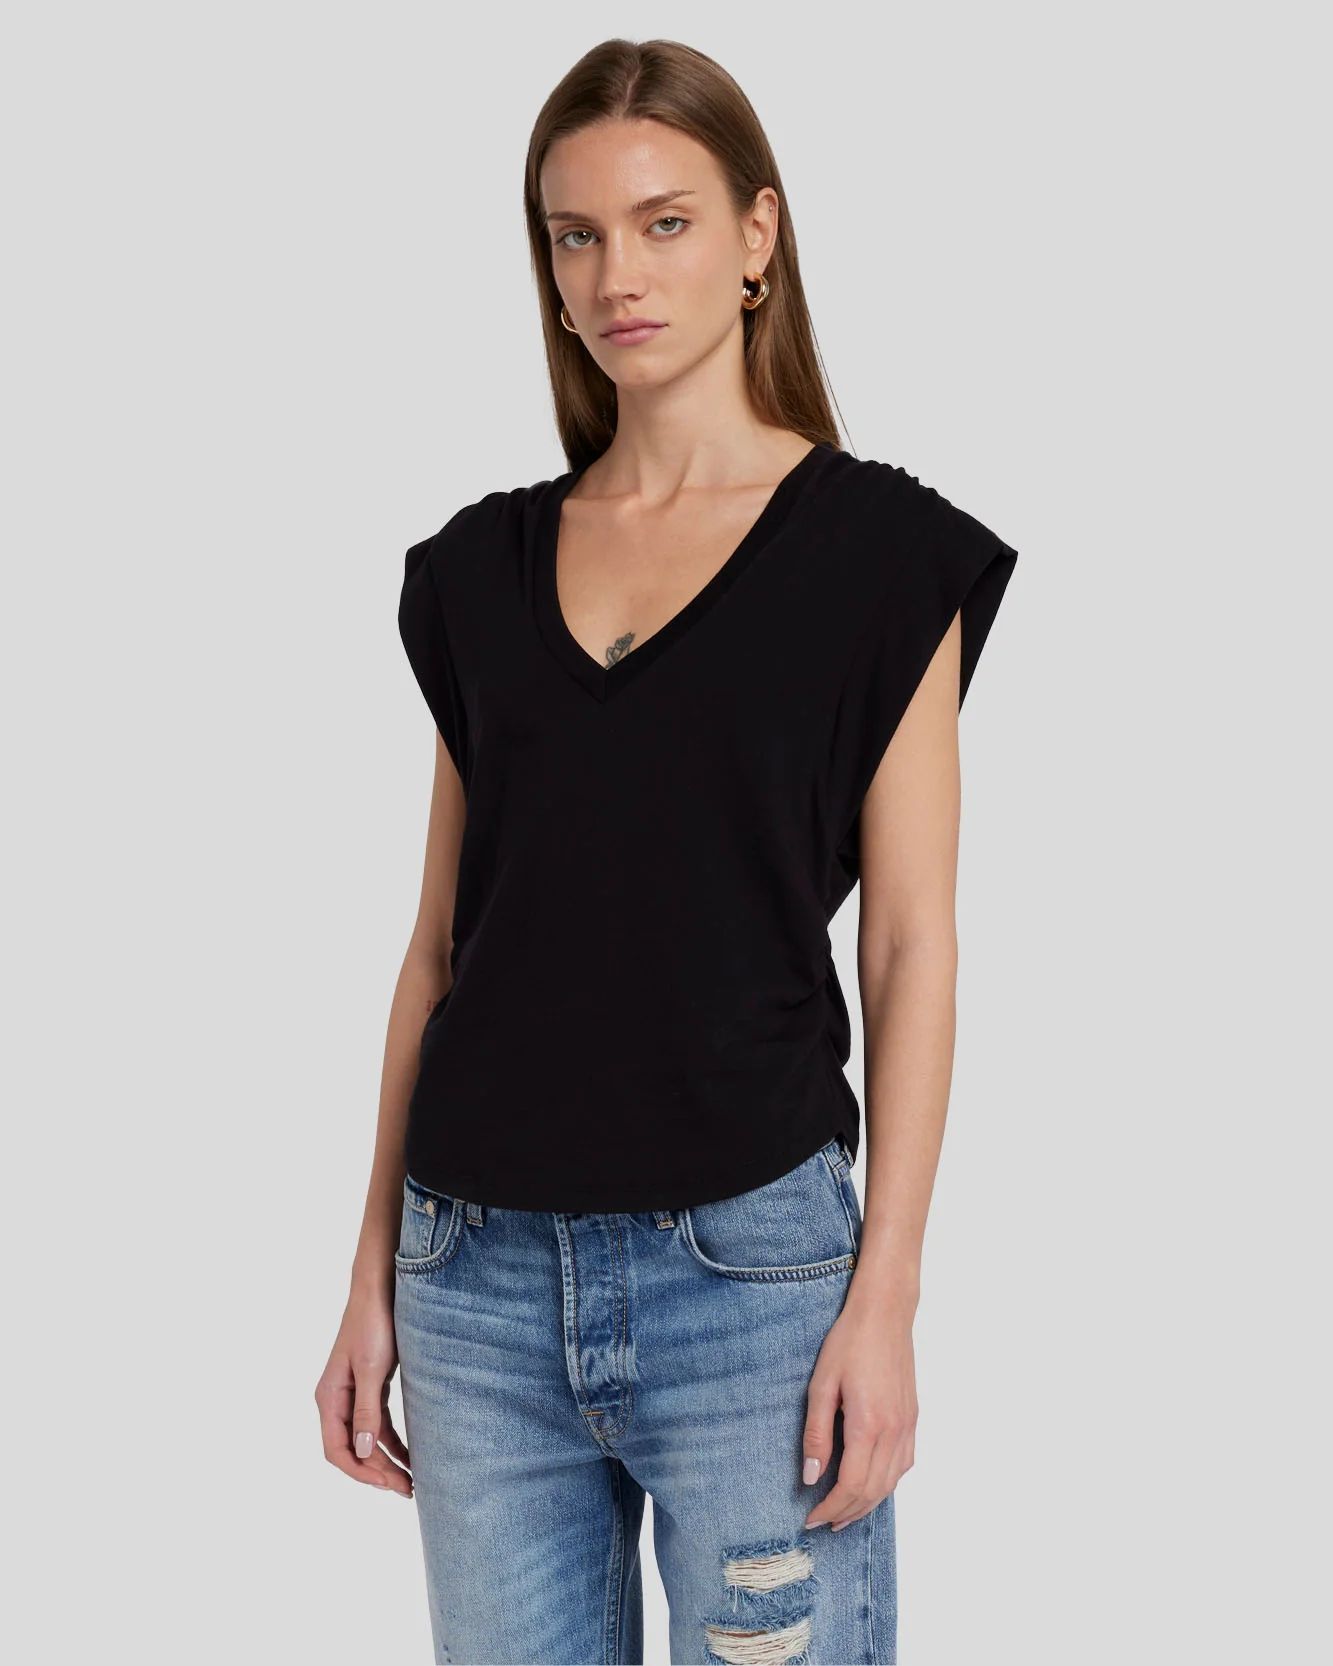 Ruched Sleeveless Tee in Black | 7 For All Mankind